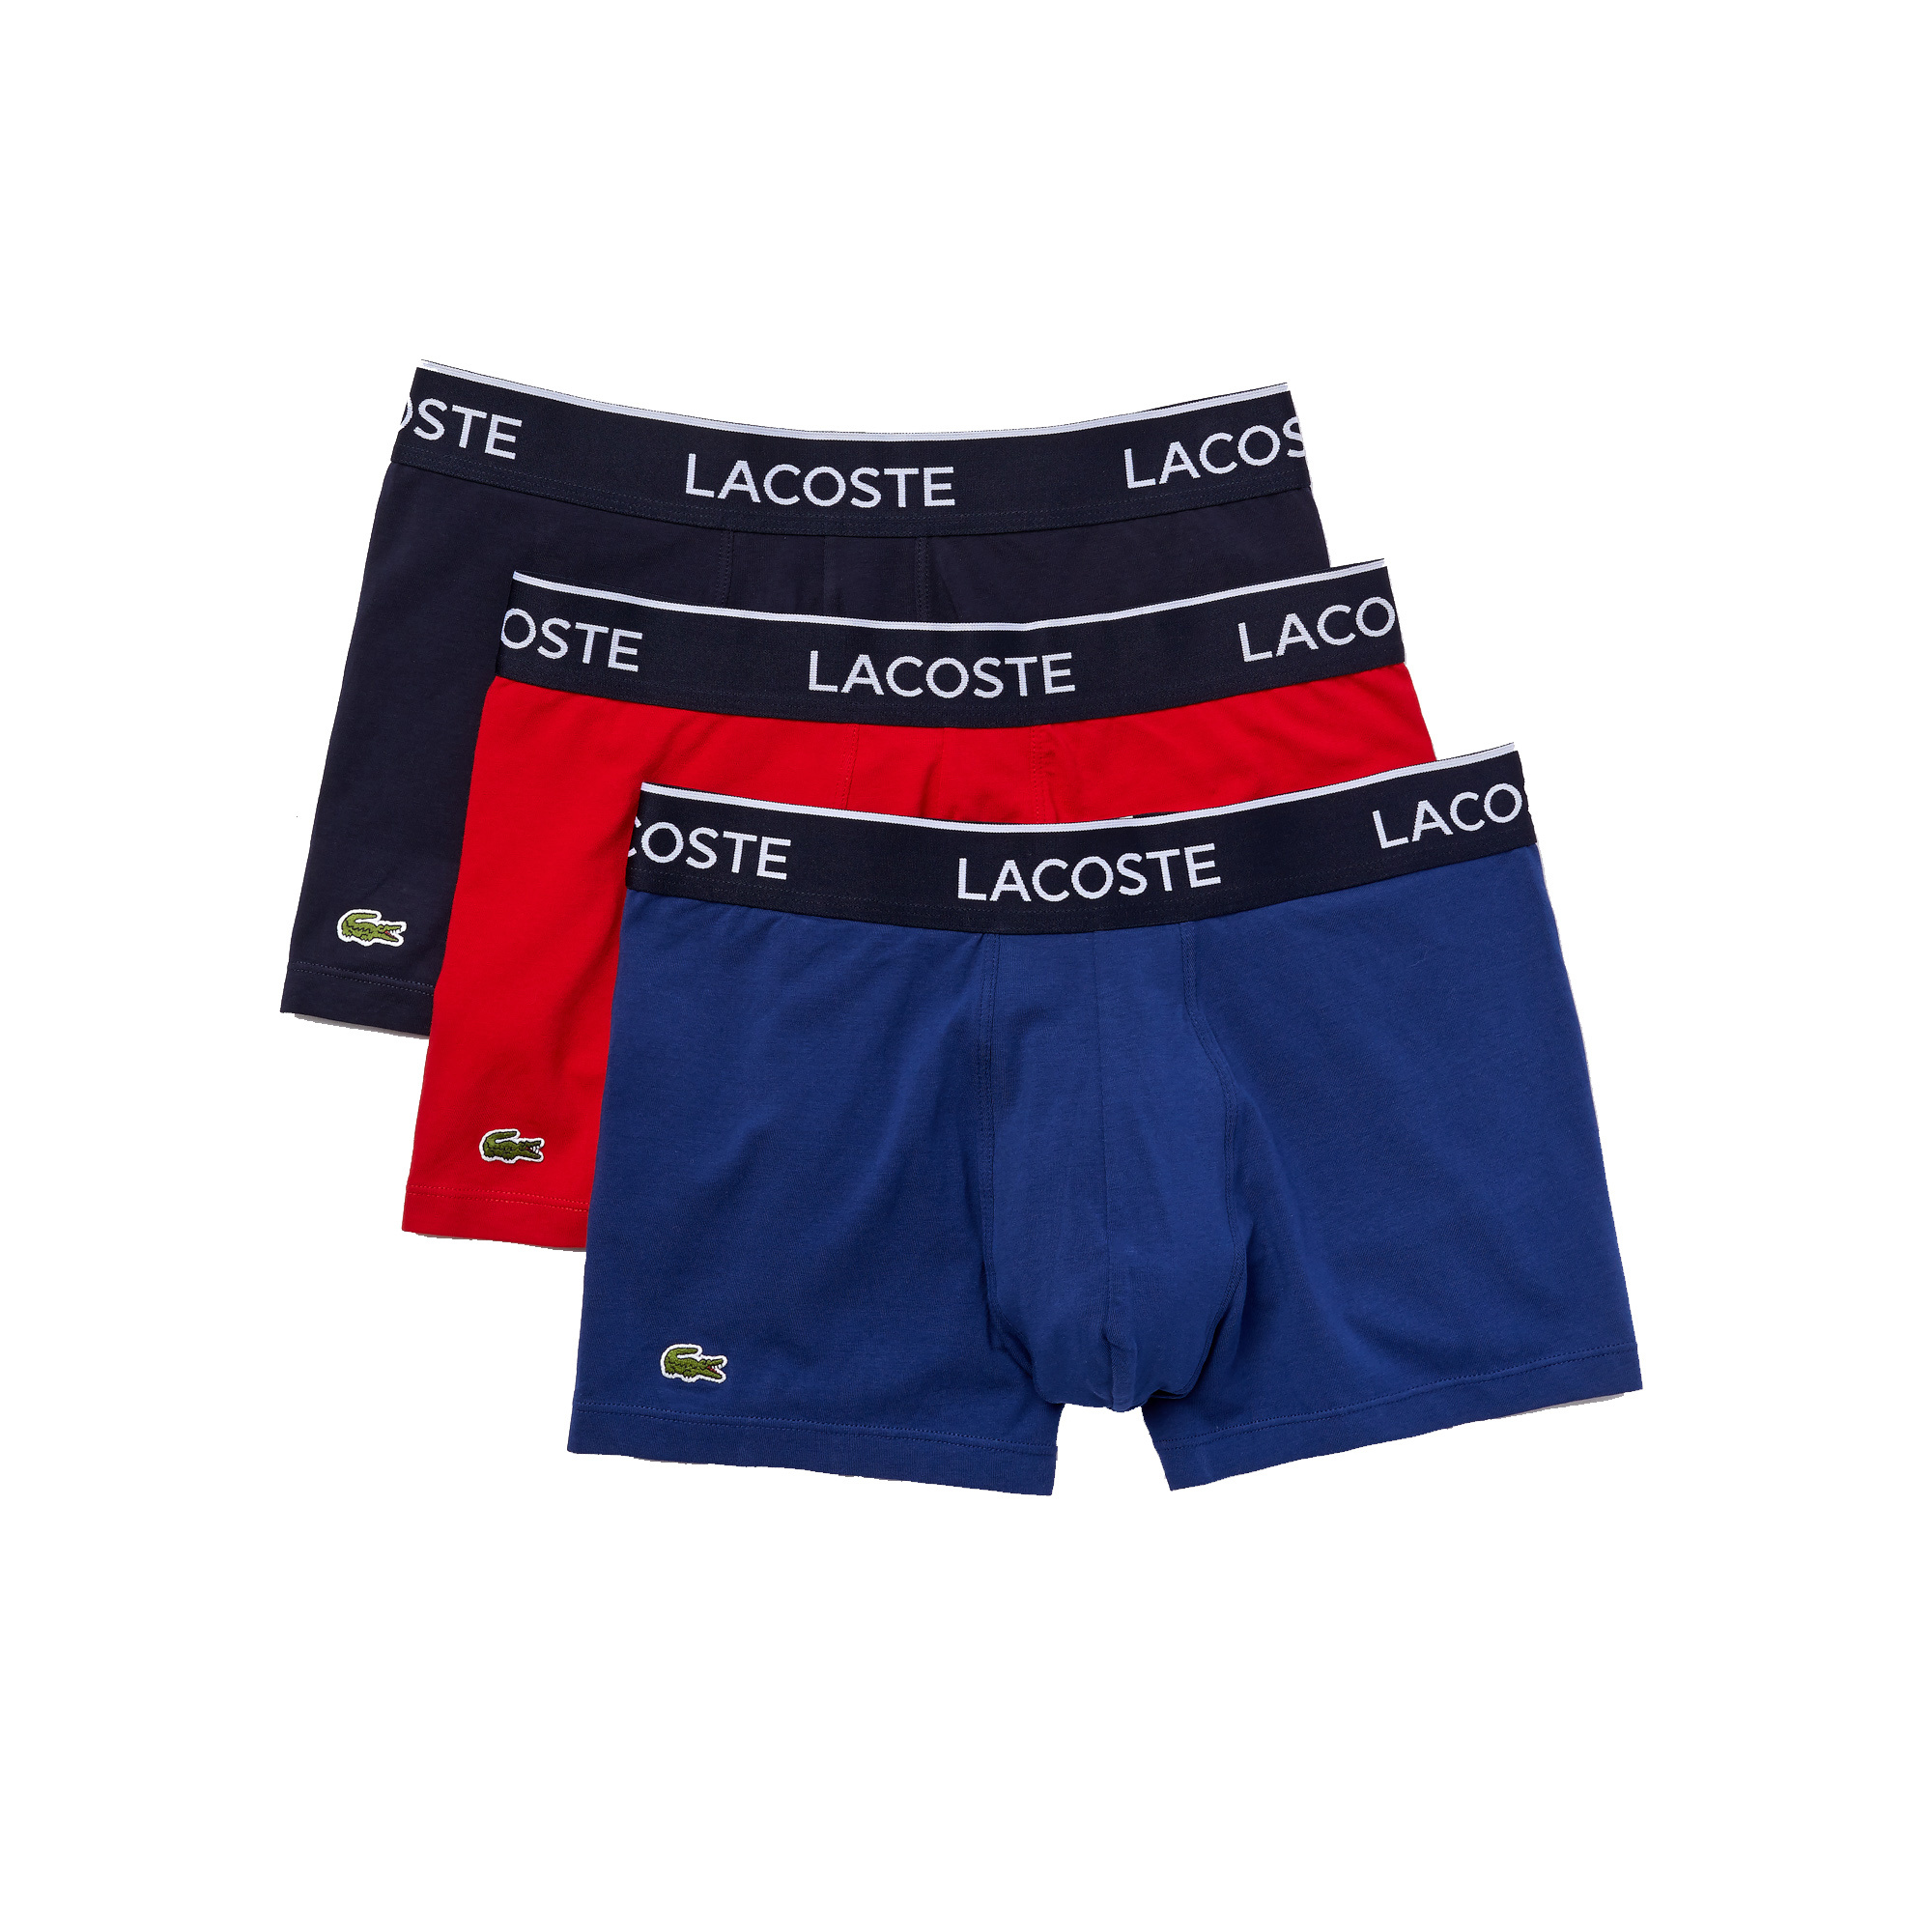 Lacoste Lacoste Classic Boxershorts Heren Navy Blauw Rood Trunks 3 Pack